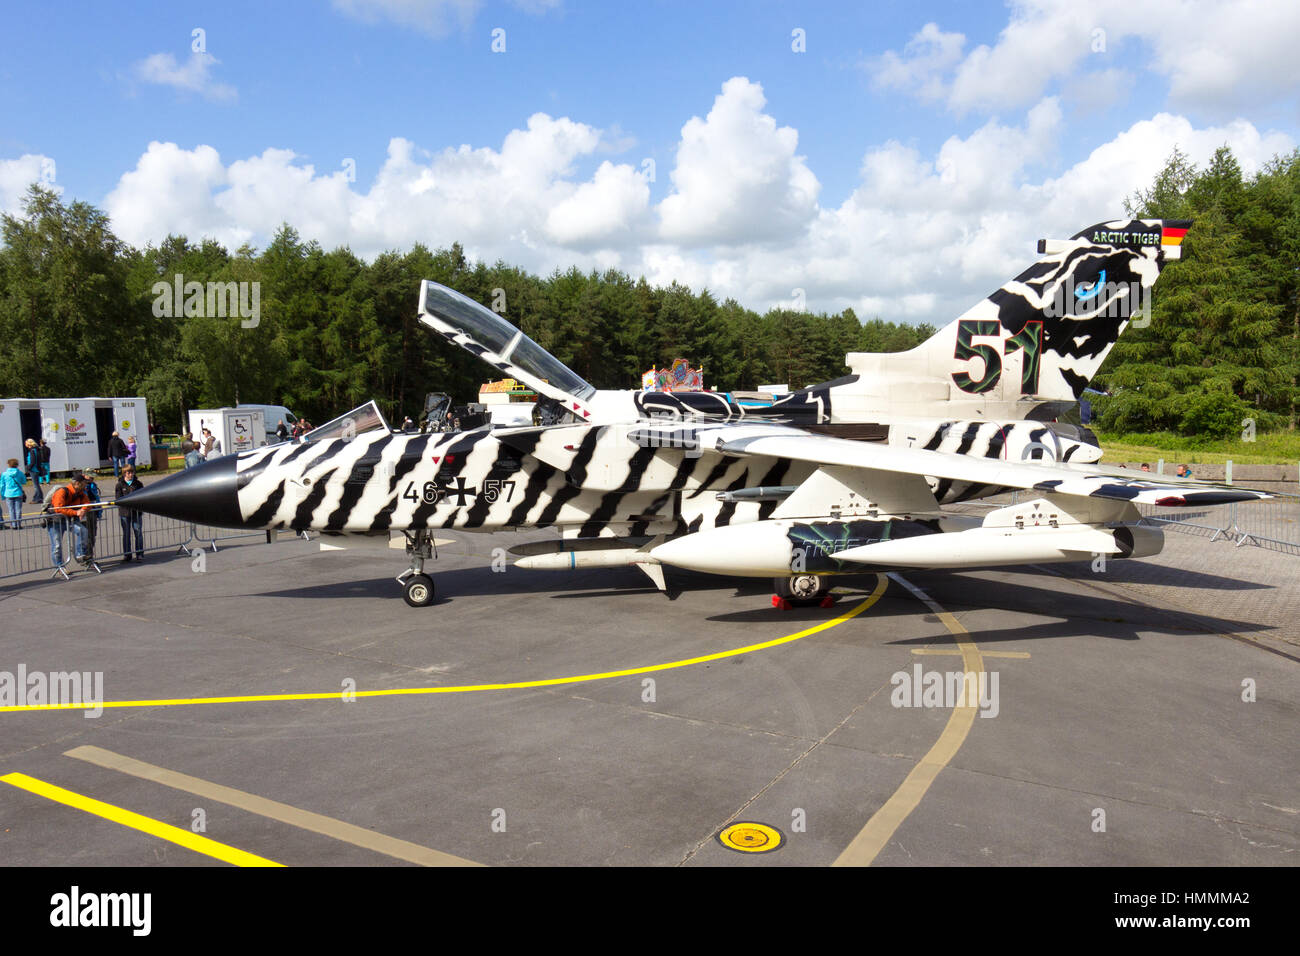 WITTMUND, GERMANY- JUNE 29: German Air Force Tornado fighter jet at the Phantom Pharewell on June 29, 2013 at Wittmund , Germany. Stock Photo